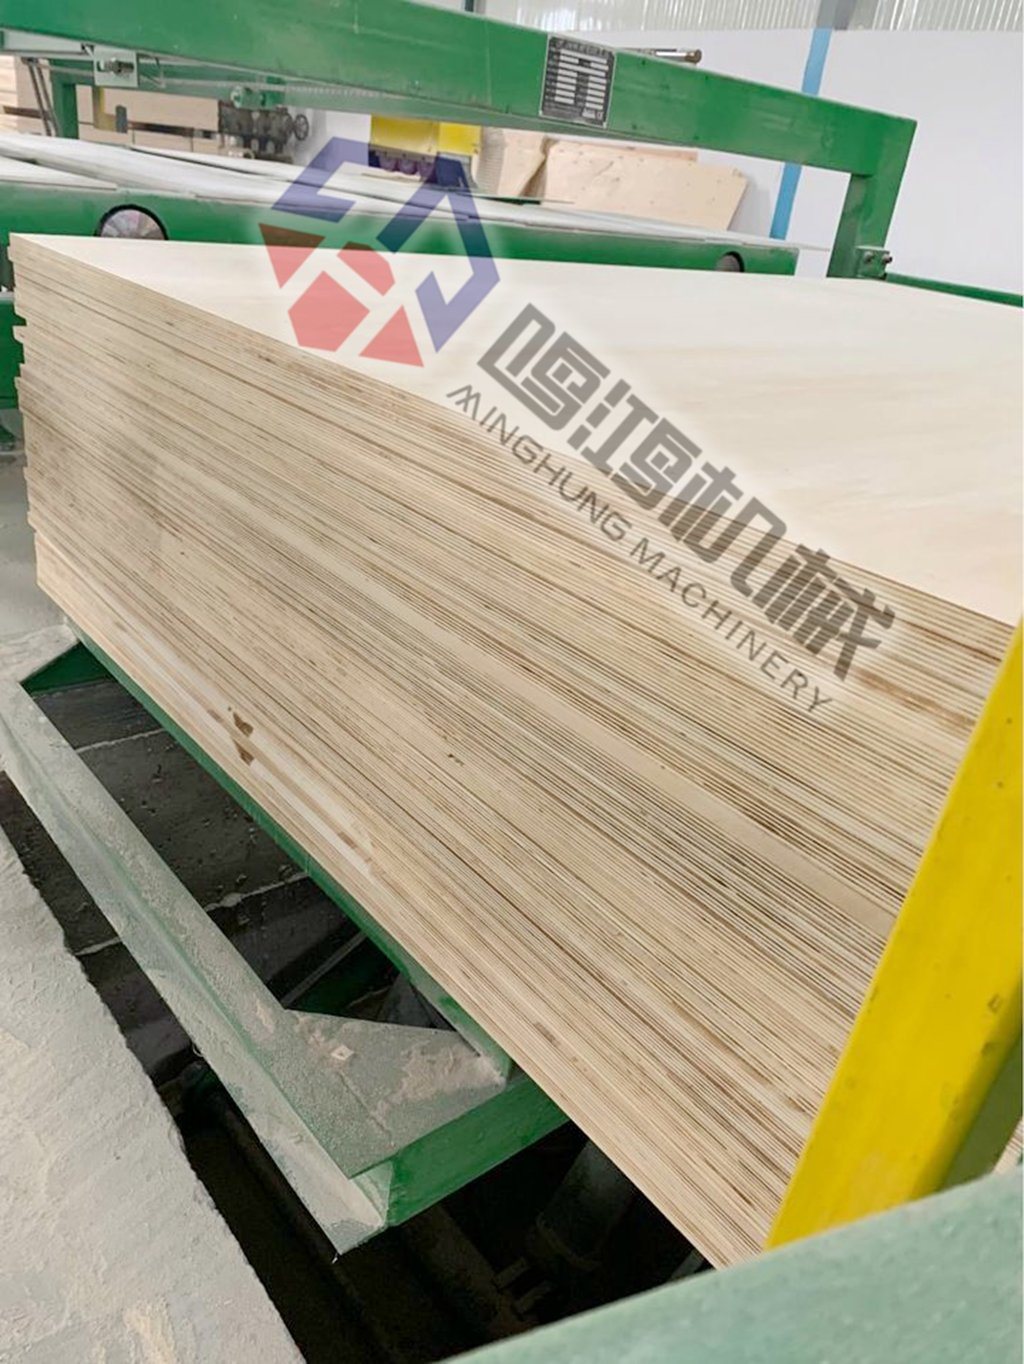 Auto Cutting Trimming Machine for Plywood Production